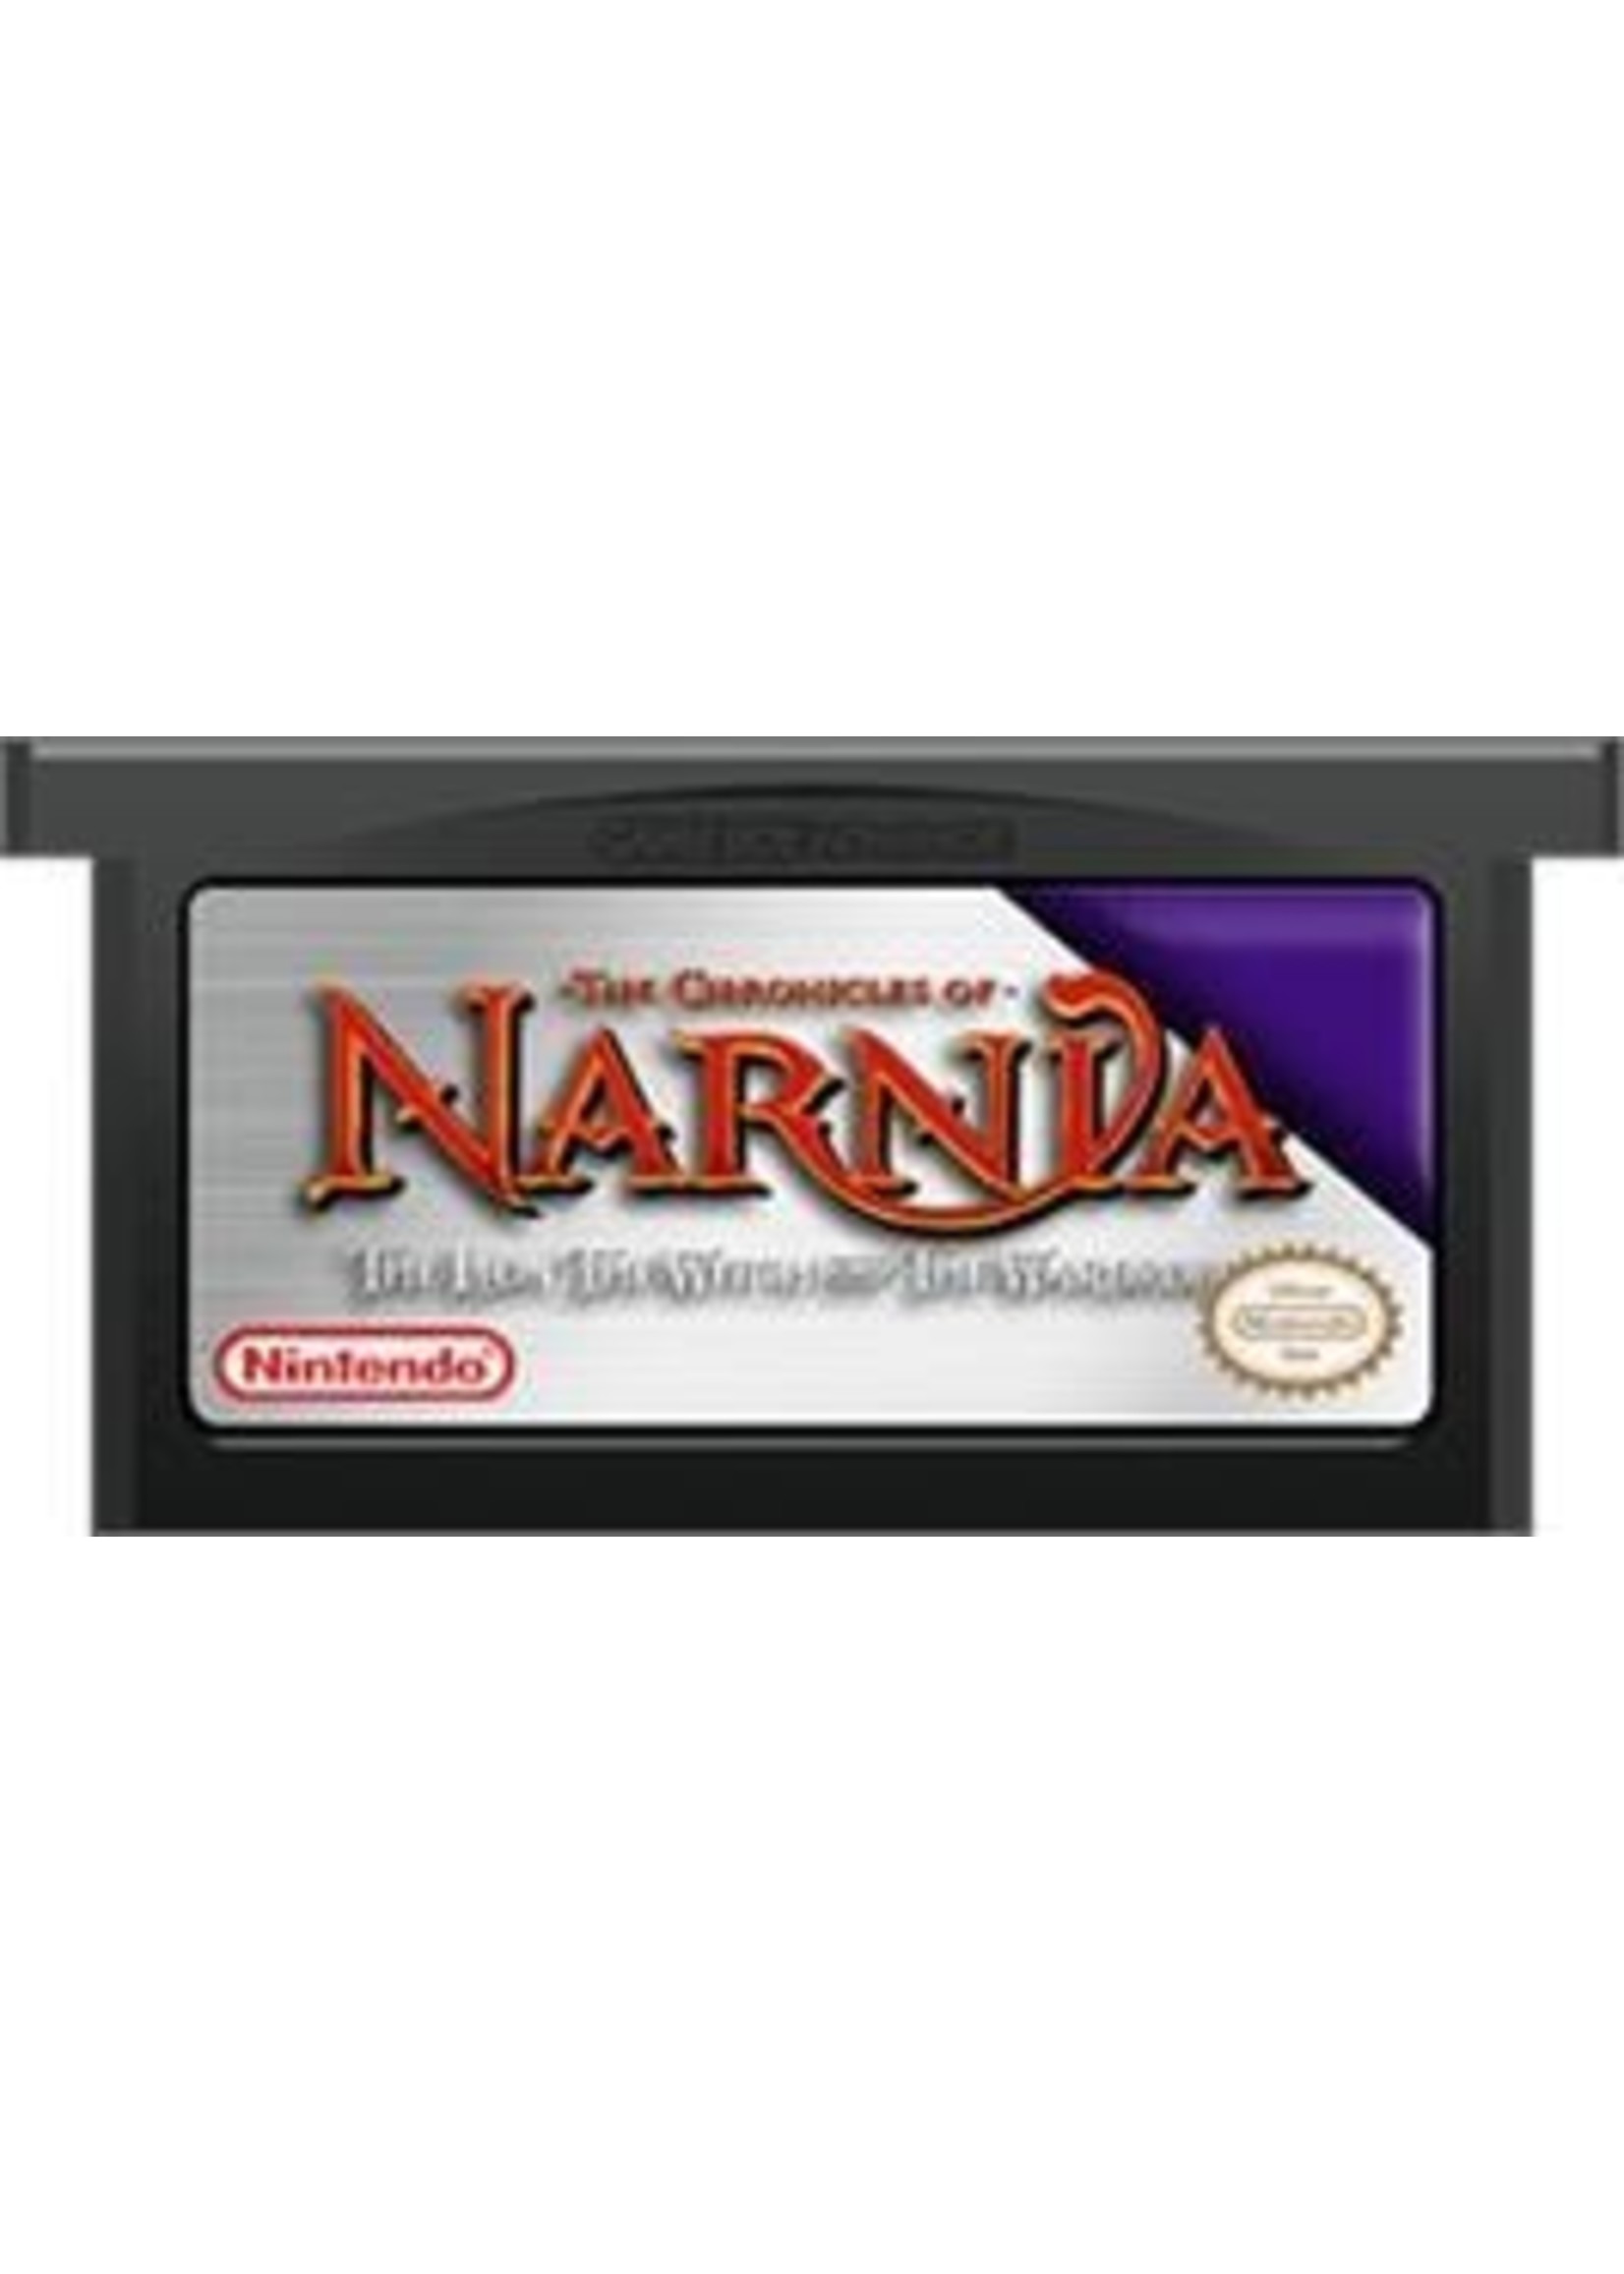 Nintendo Gameboy Advance Chronicles of Narnia Lion Witch and the Wardrobe